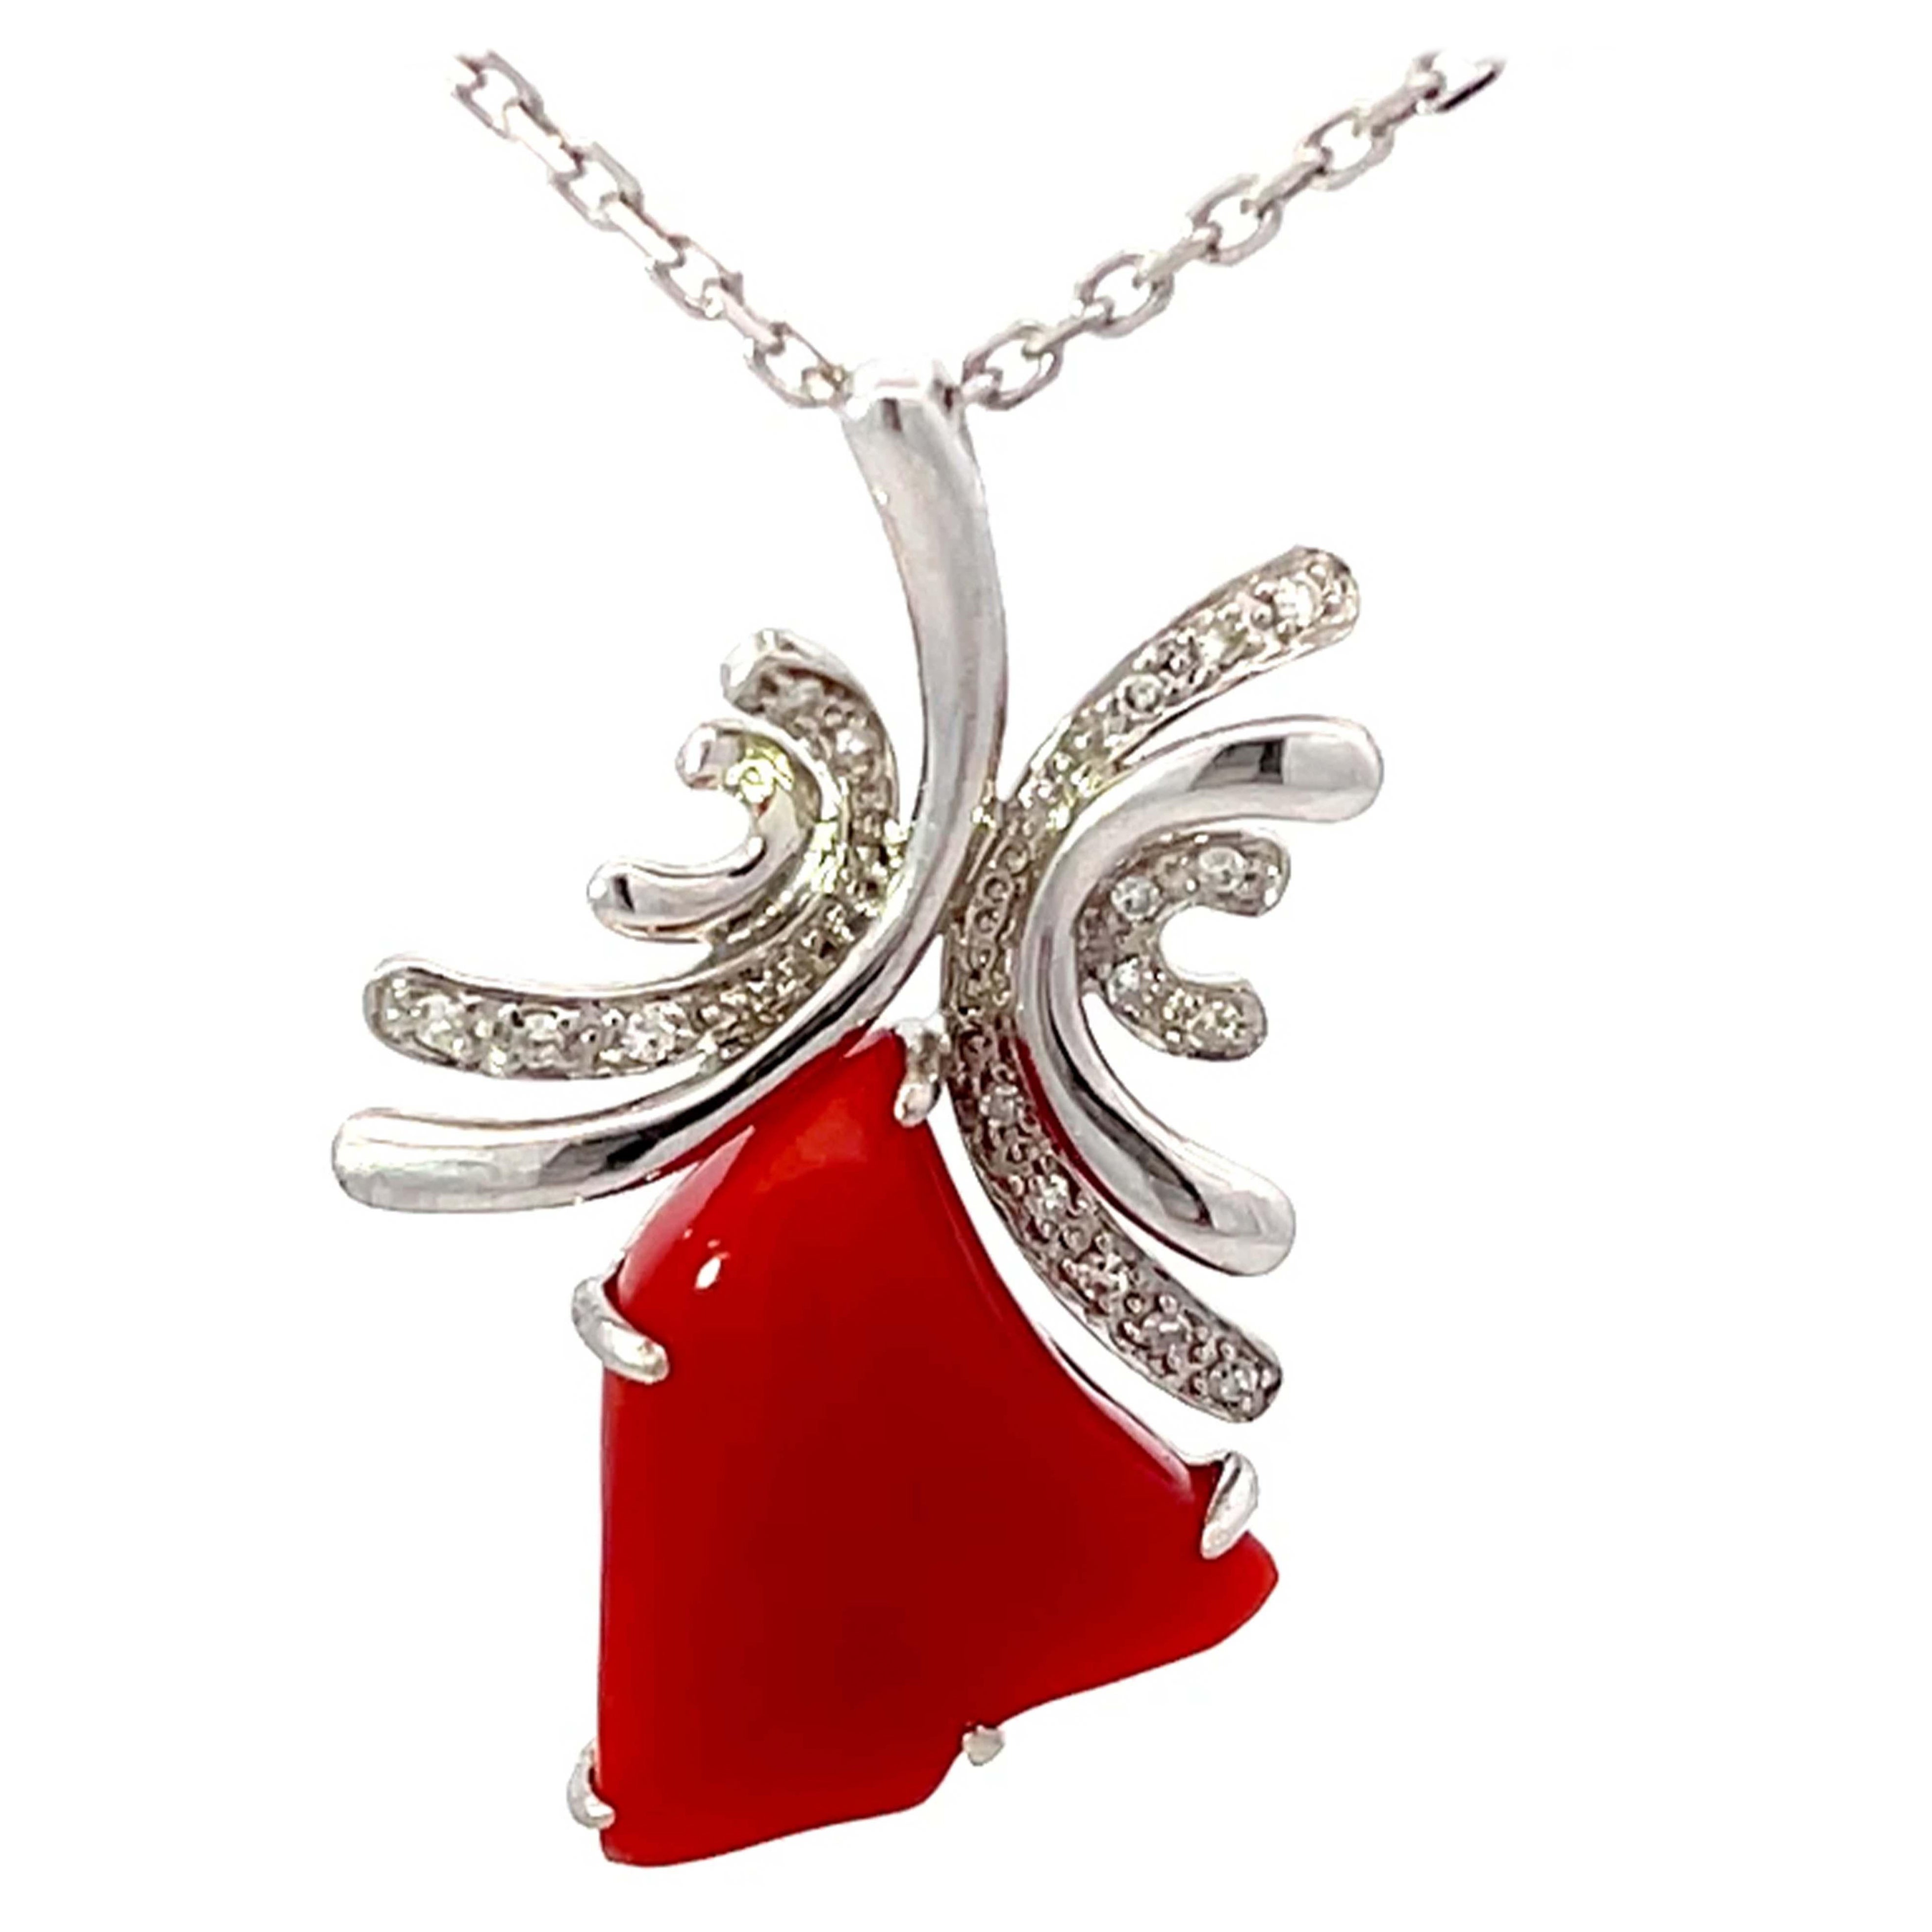 Aka Coral Red Heart Diamond Necklace Solid 14k White Gold